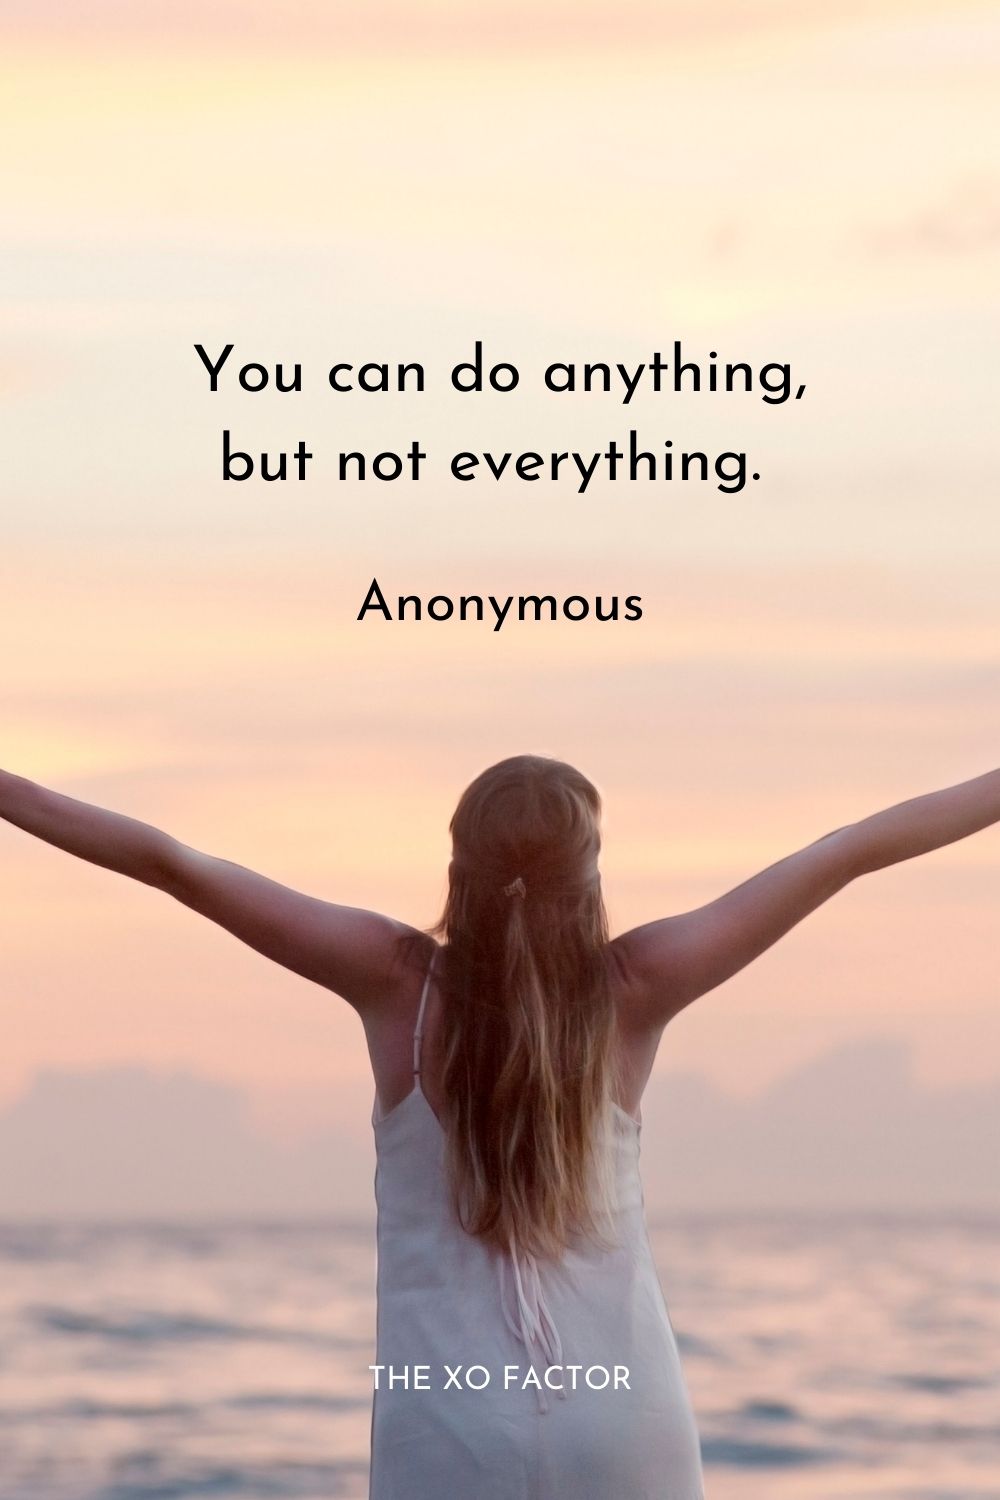 You can do anything, but not everything. Anonymous